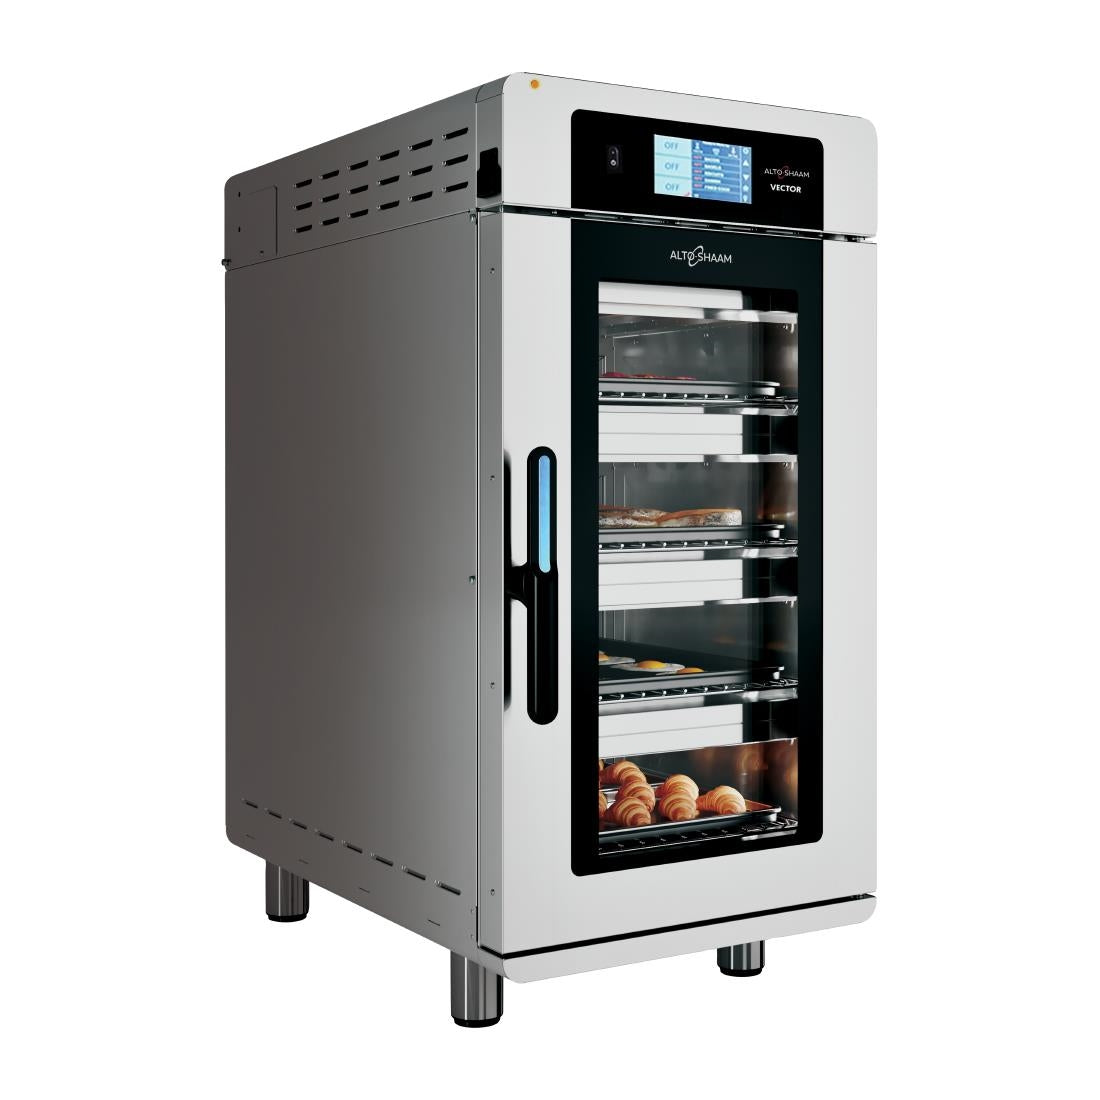 CX592 Alto-Shaam Simple Control VECTOR 4 Shelf Multi-Cook Oven VMC-H4H SX JD Catering Equipment Solutions Ltd